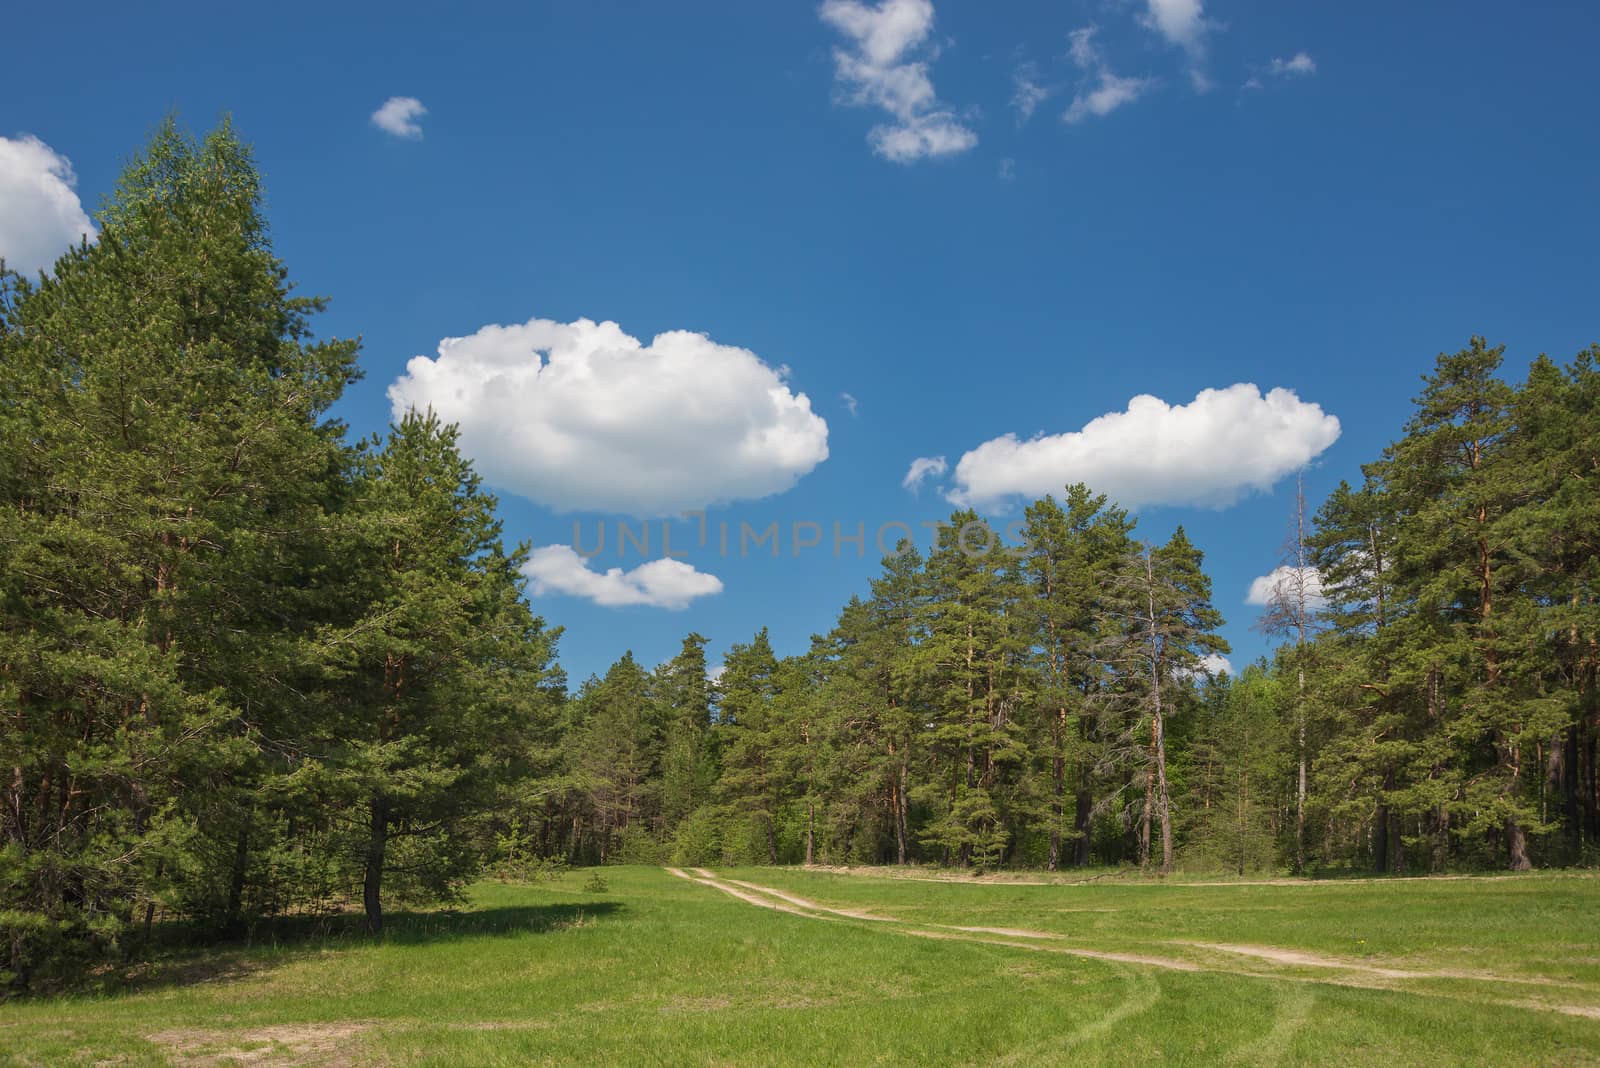 Beautiful landscape: dirt road is on a large green meadow in the middle of a pine forest under blue sky with white clouds